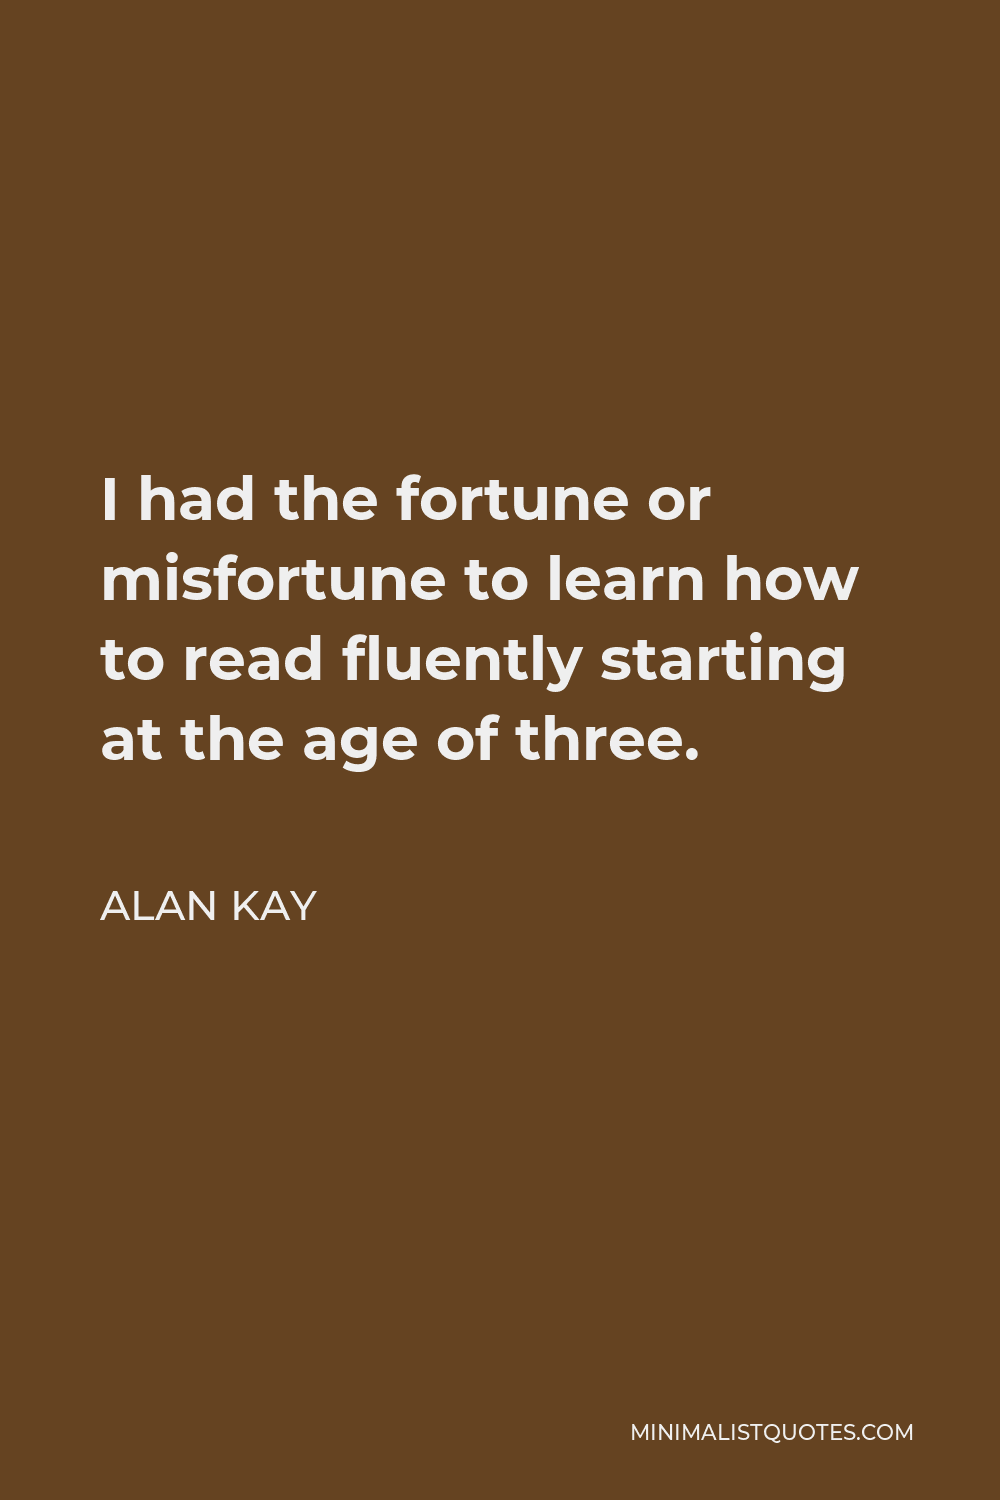 Alan Kay Quote - I had the fortune or misfortune to learn how to read fluently starting at the age of three.